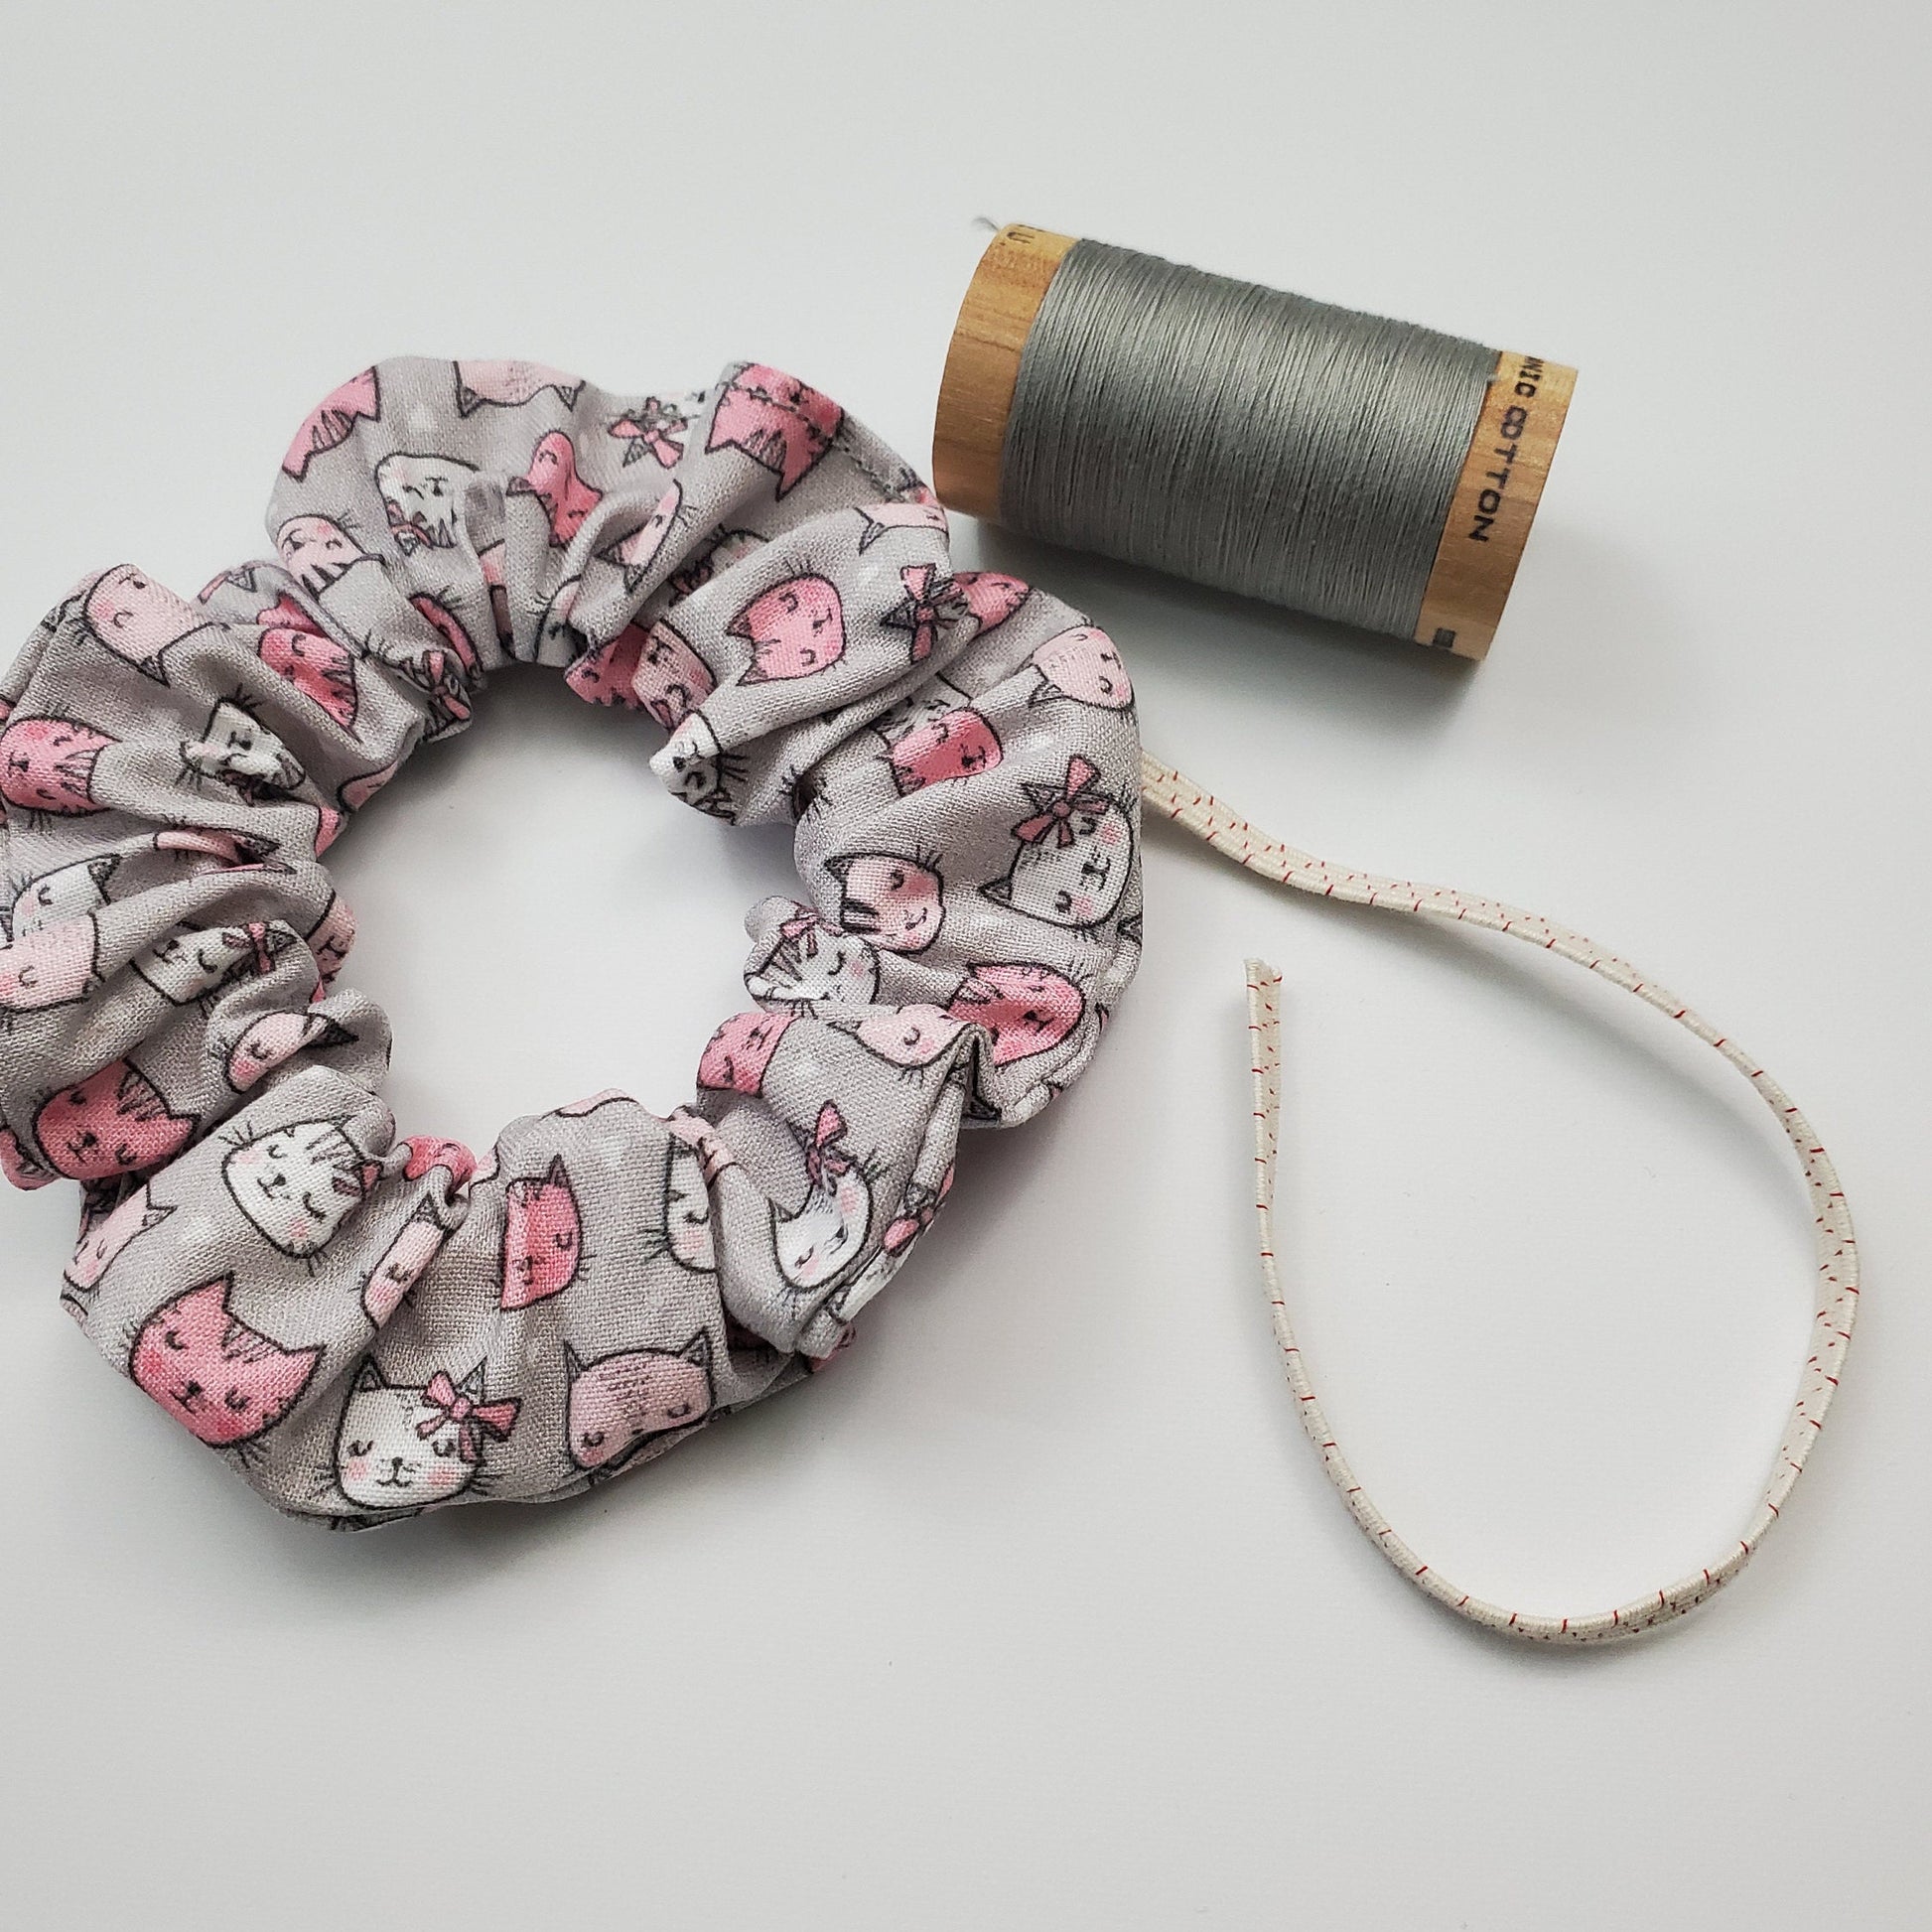 Scrunchie next to a wooden spool of gray thread and a piece of the biodegradable elastic.